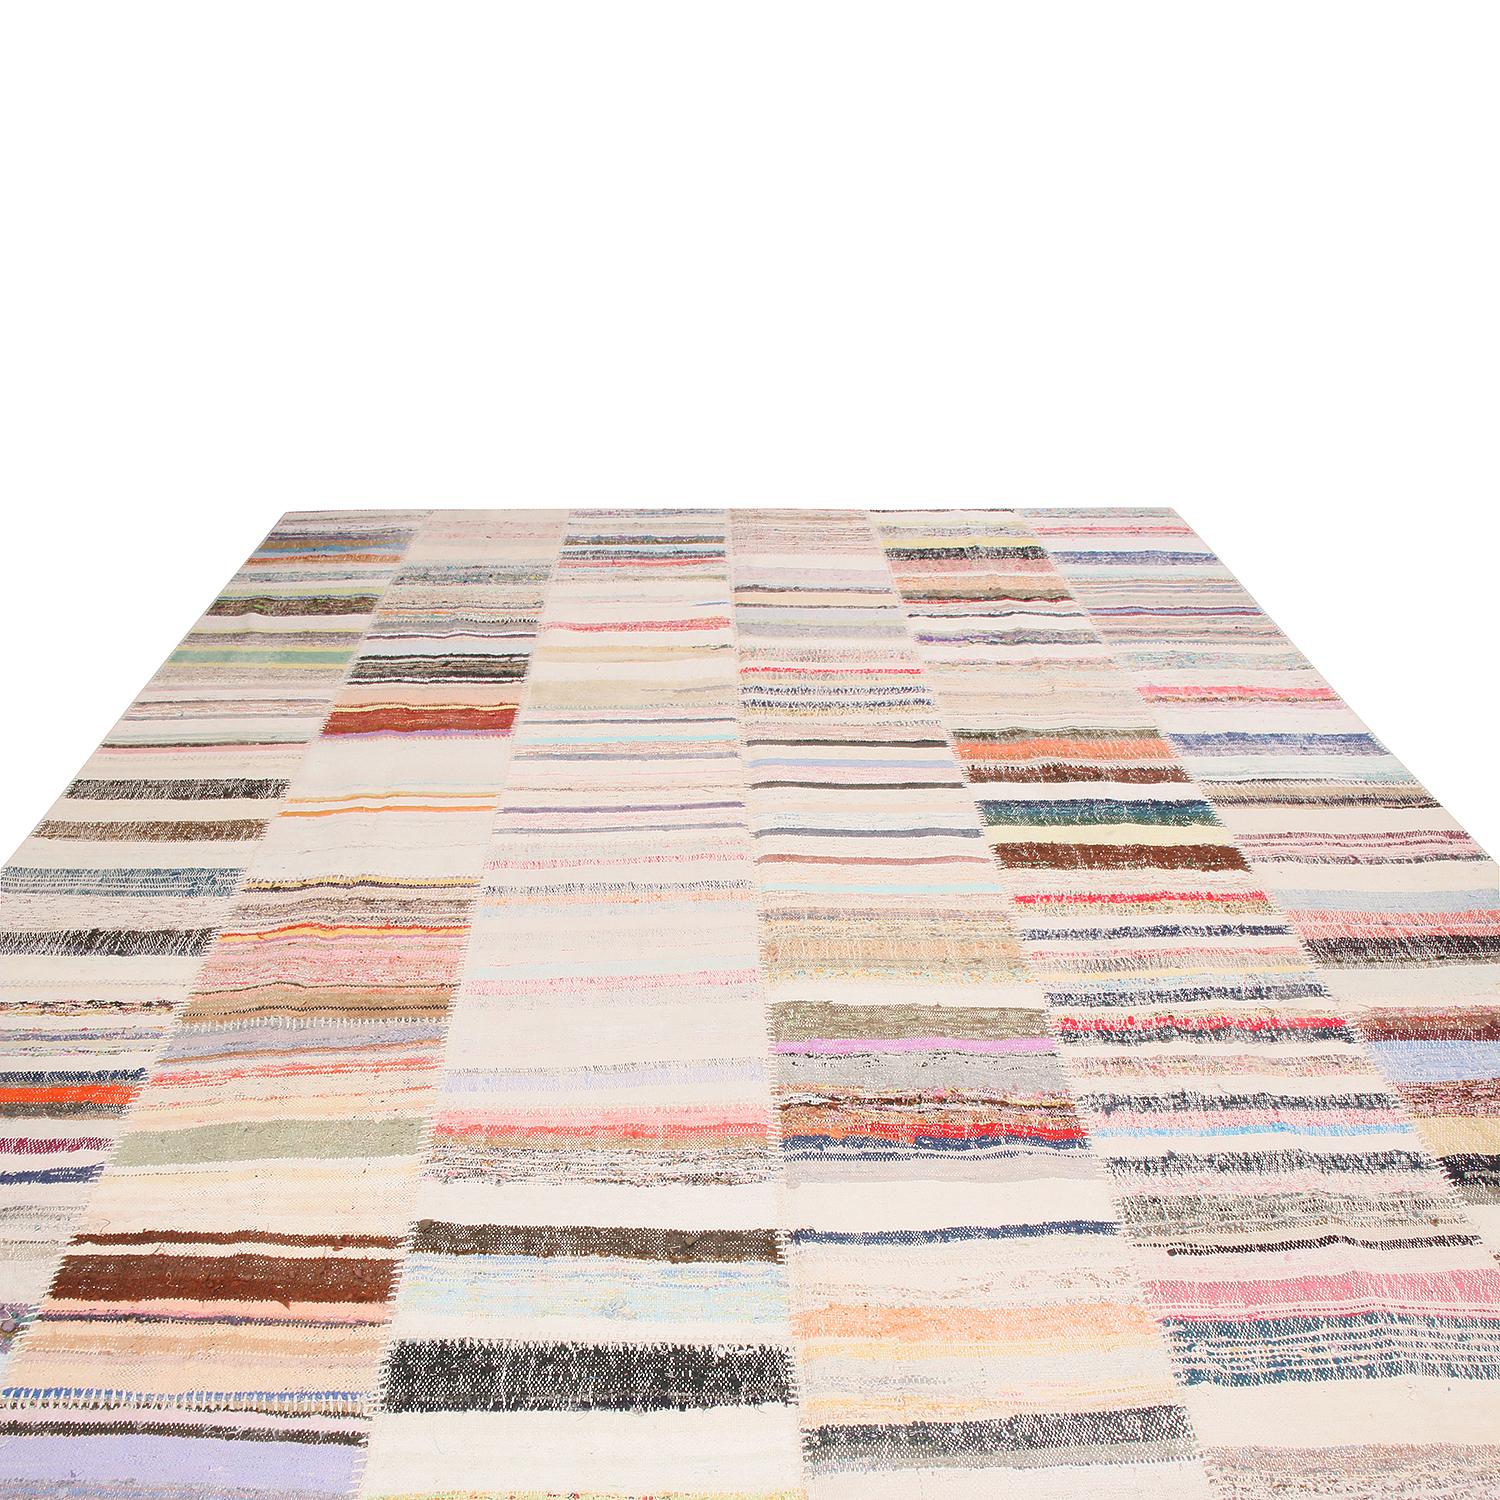 Handwoven in high-quality wool originating from Turkey, this new flat-woven geometric Kilim rug from Rug & Kilim’s patchwork collection is comprised of select pieces from vintage Kilim rugs, enjoying a spectrum of red, blue, pink, green, and other